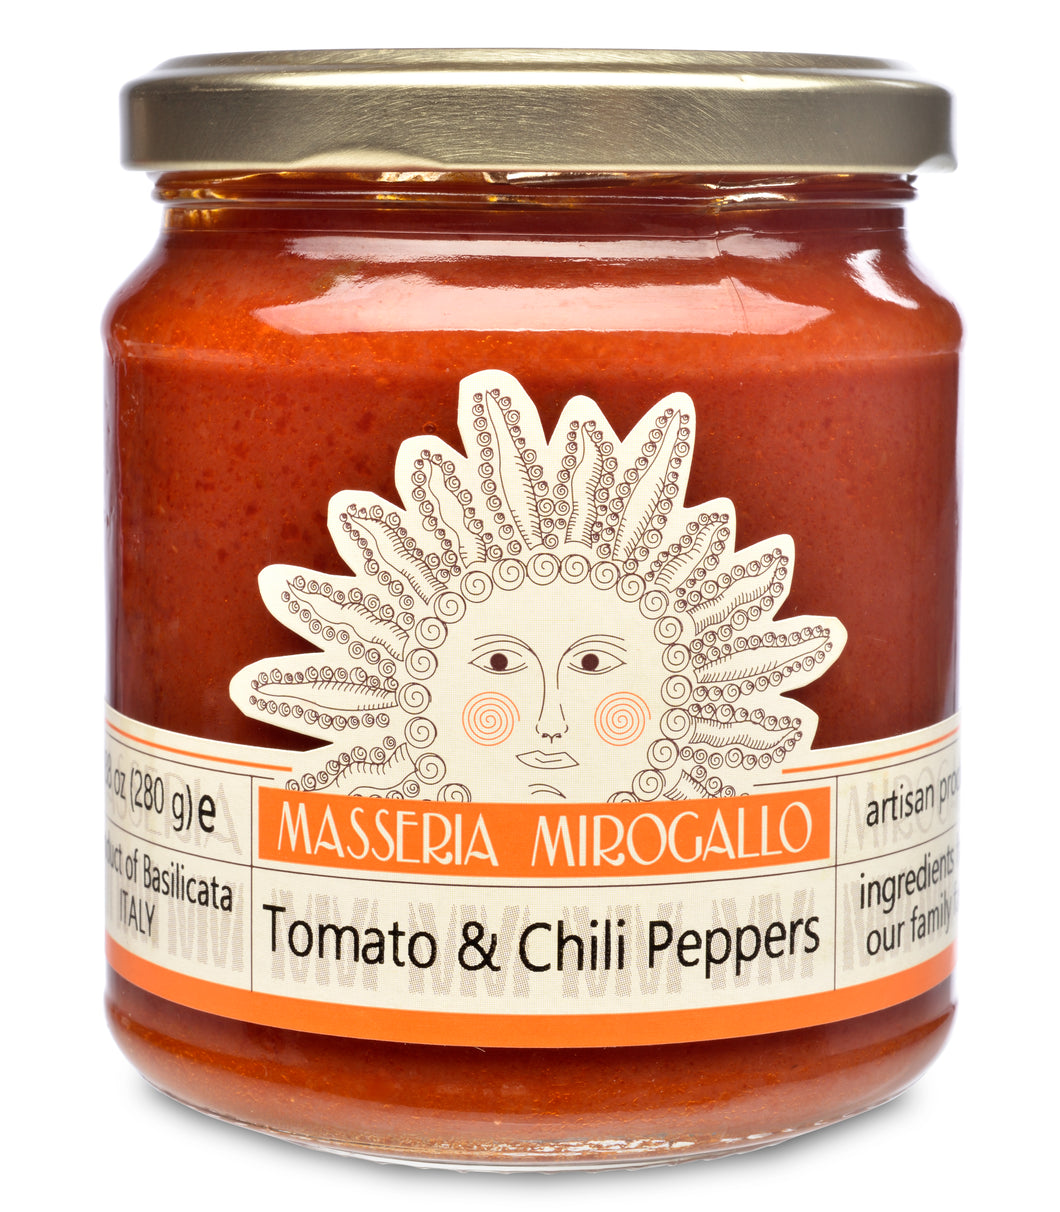 Spicy Tomato Sauce with Chili Peppers from Masseria Mirogallo